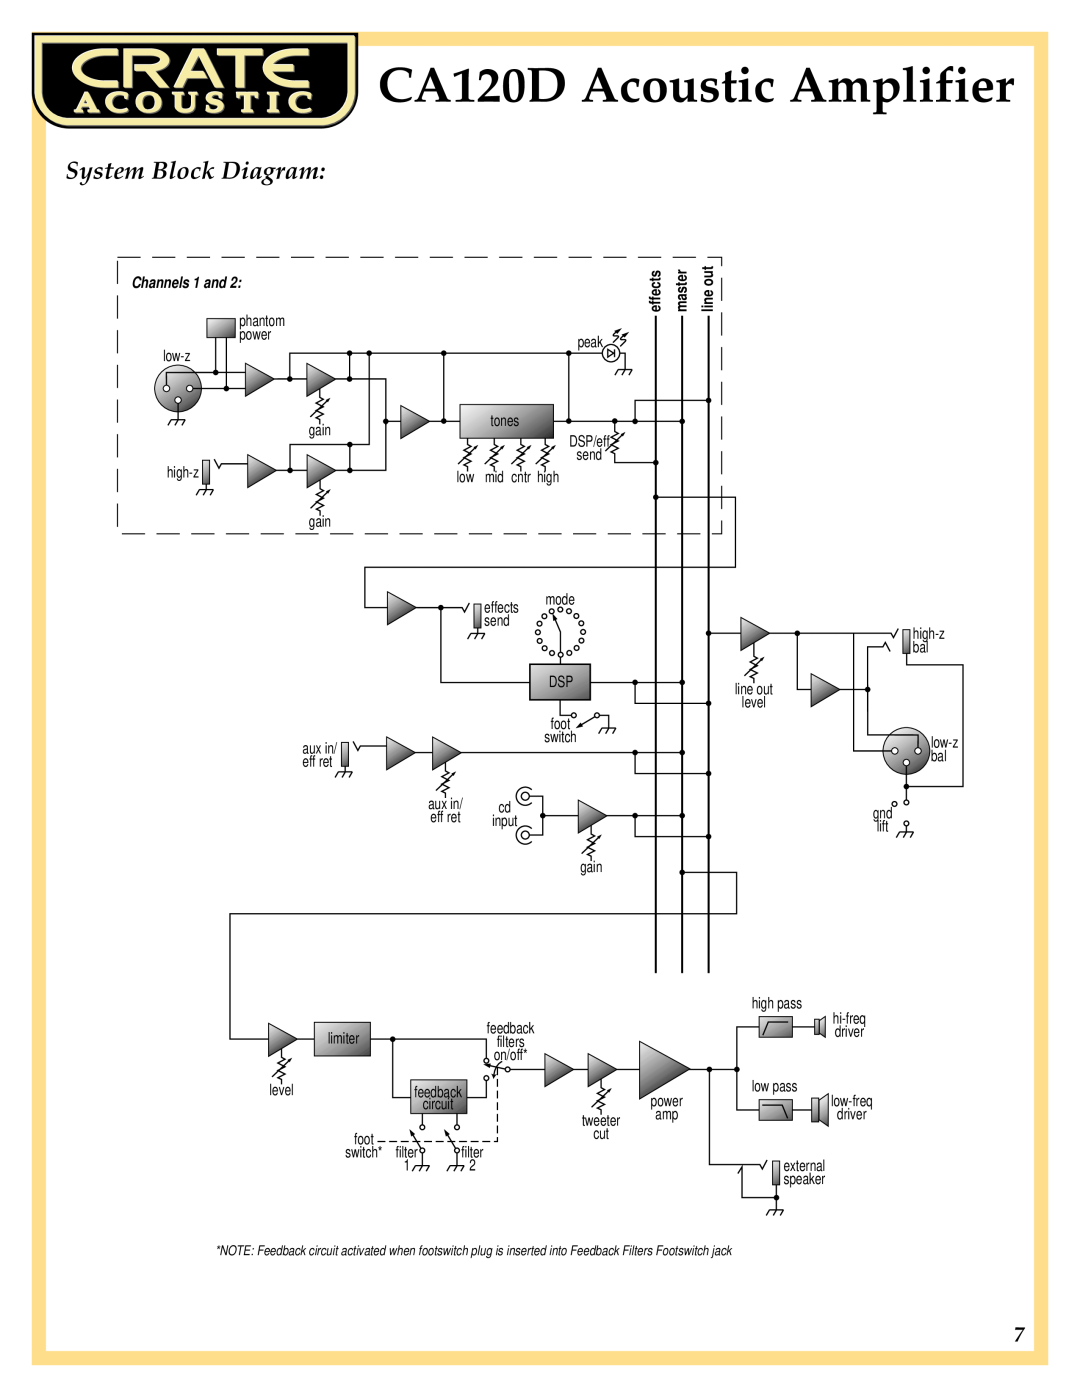 Crate Amplifiers manual System Block Diagram, CA120D Acoustic Amplifier, Channels 1 and 